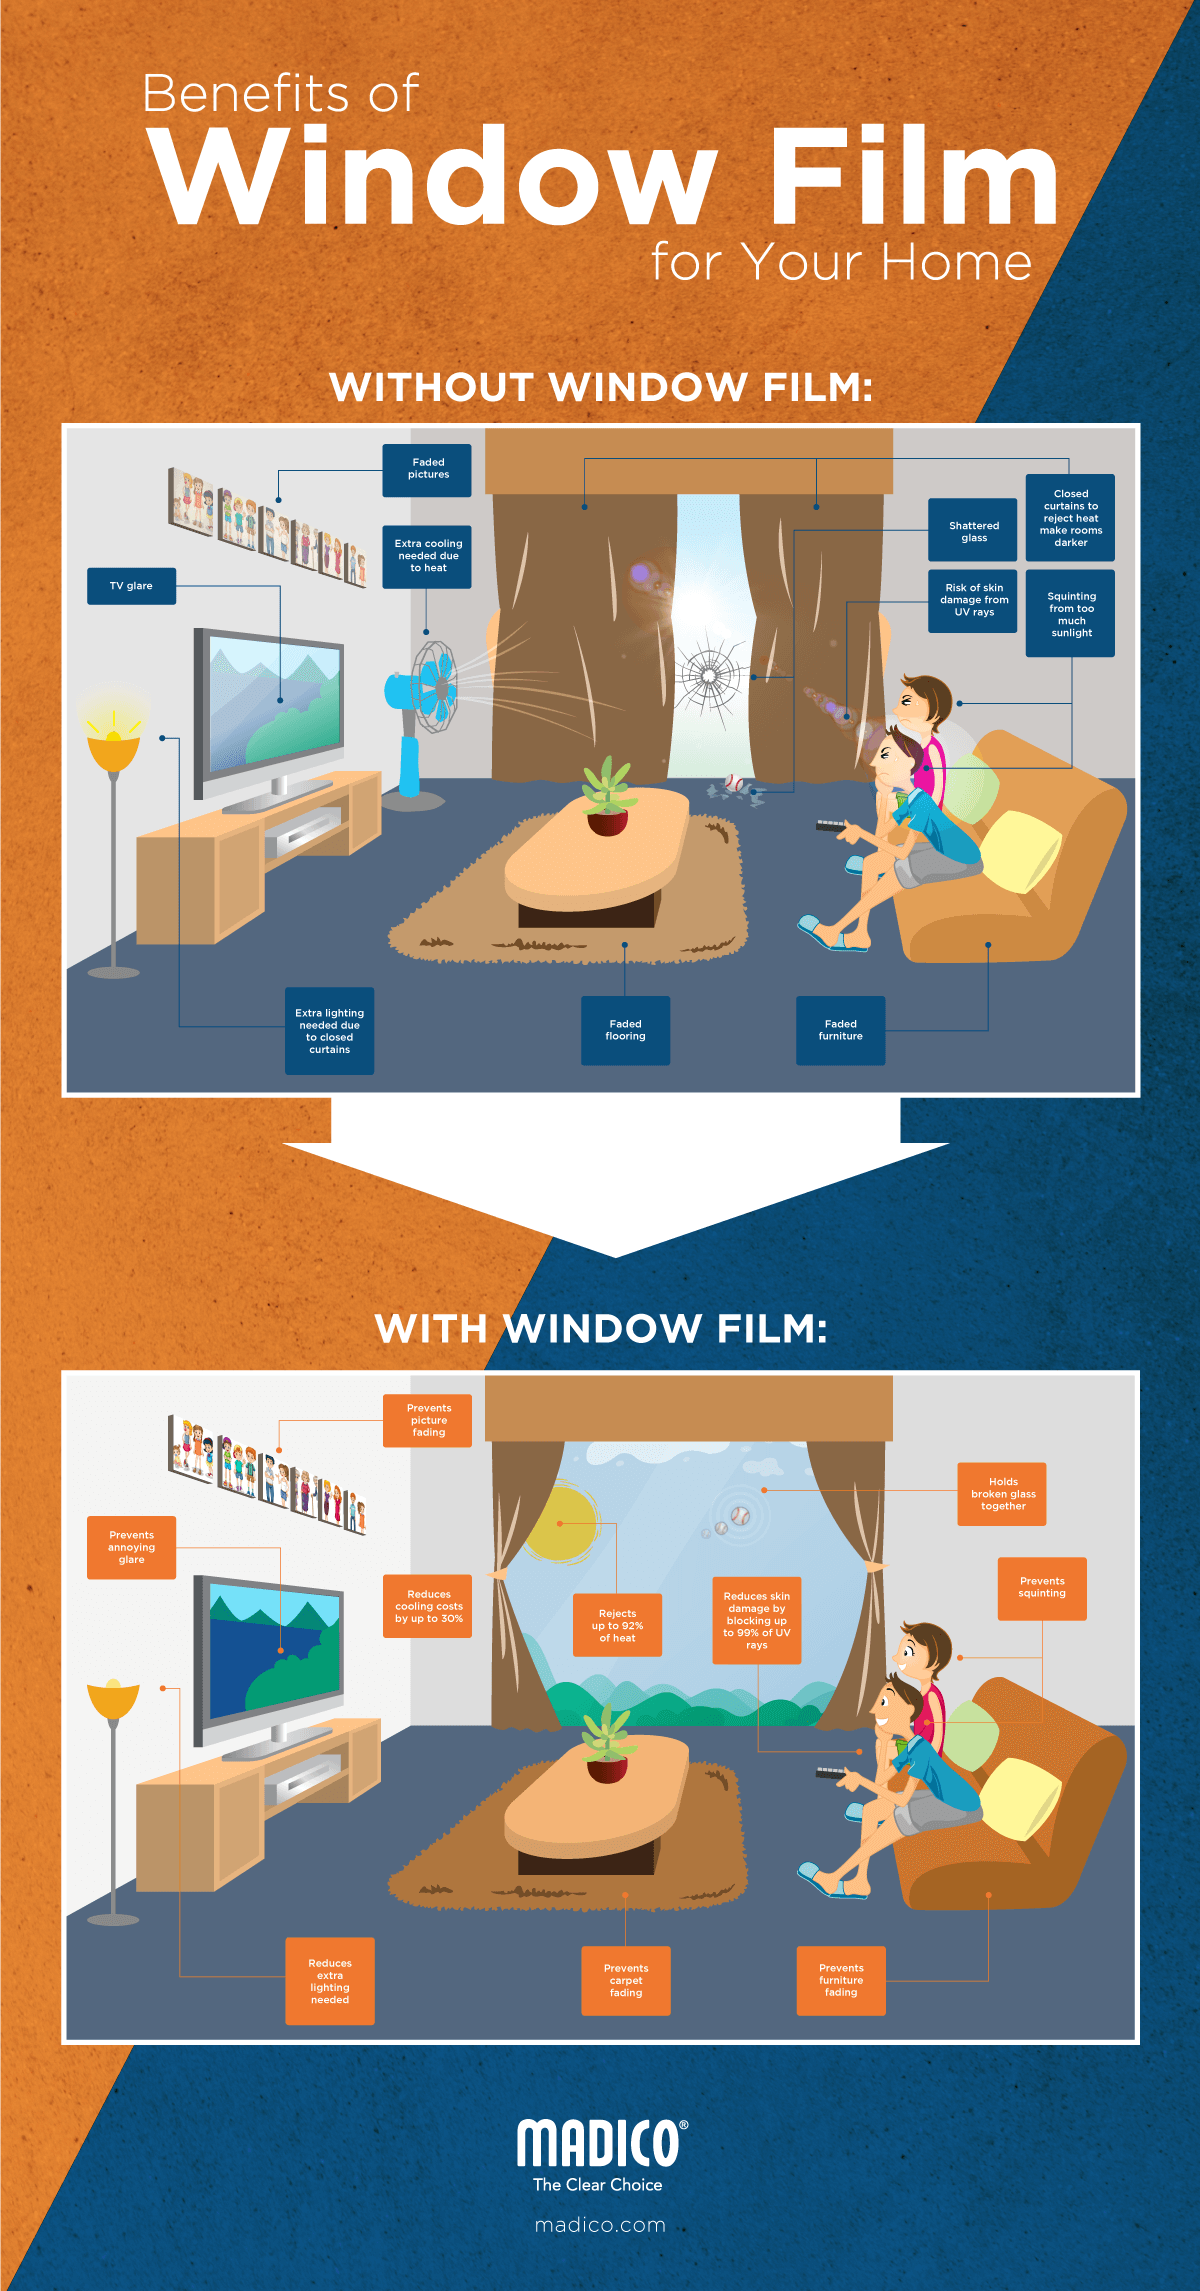 Infographic-Benefits-of-Window-Film-for-Your-Home-004-MADICO-BRANDING